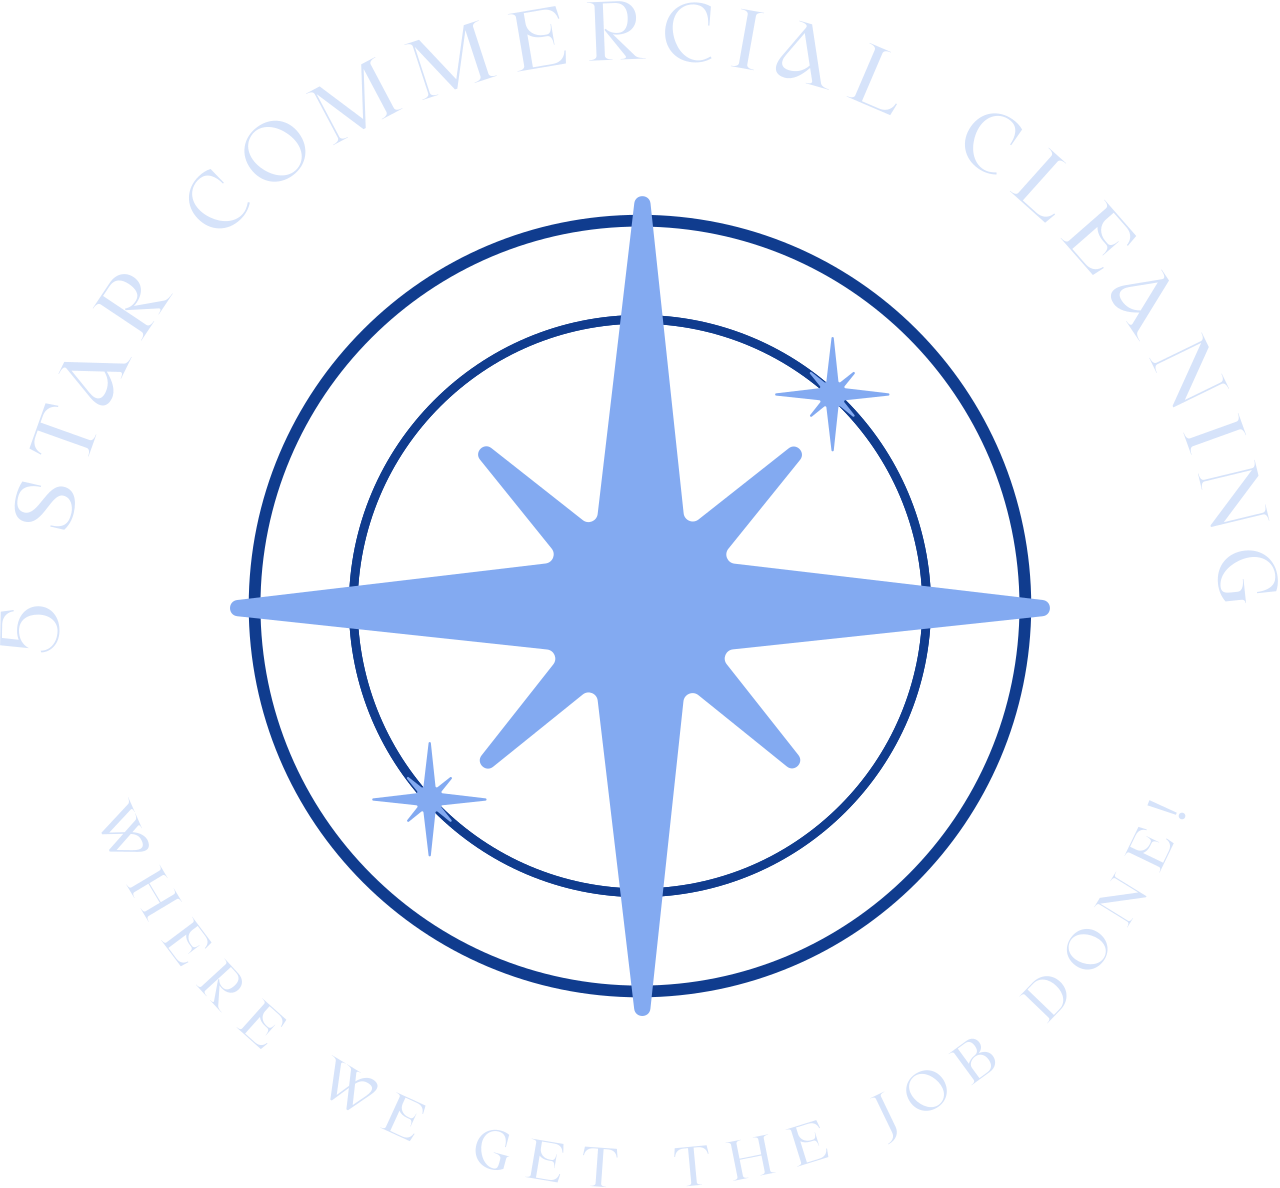 5 STAR COMMERCIAL CLEANING LLC's logo